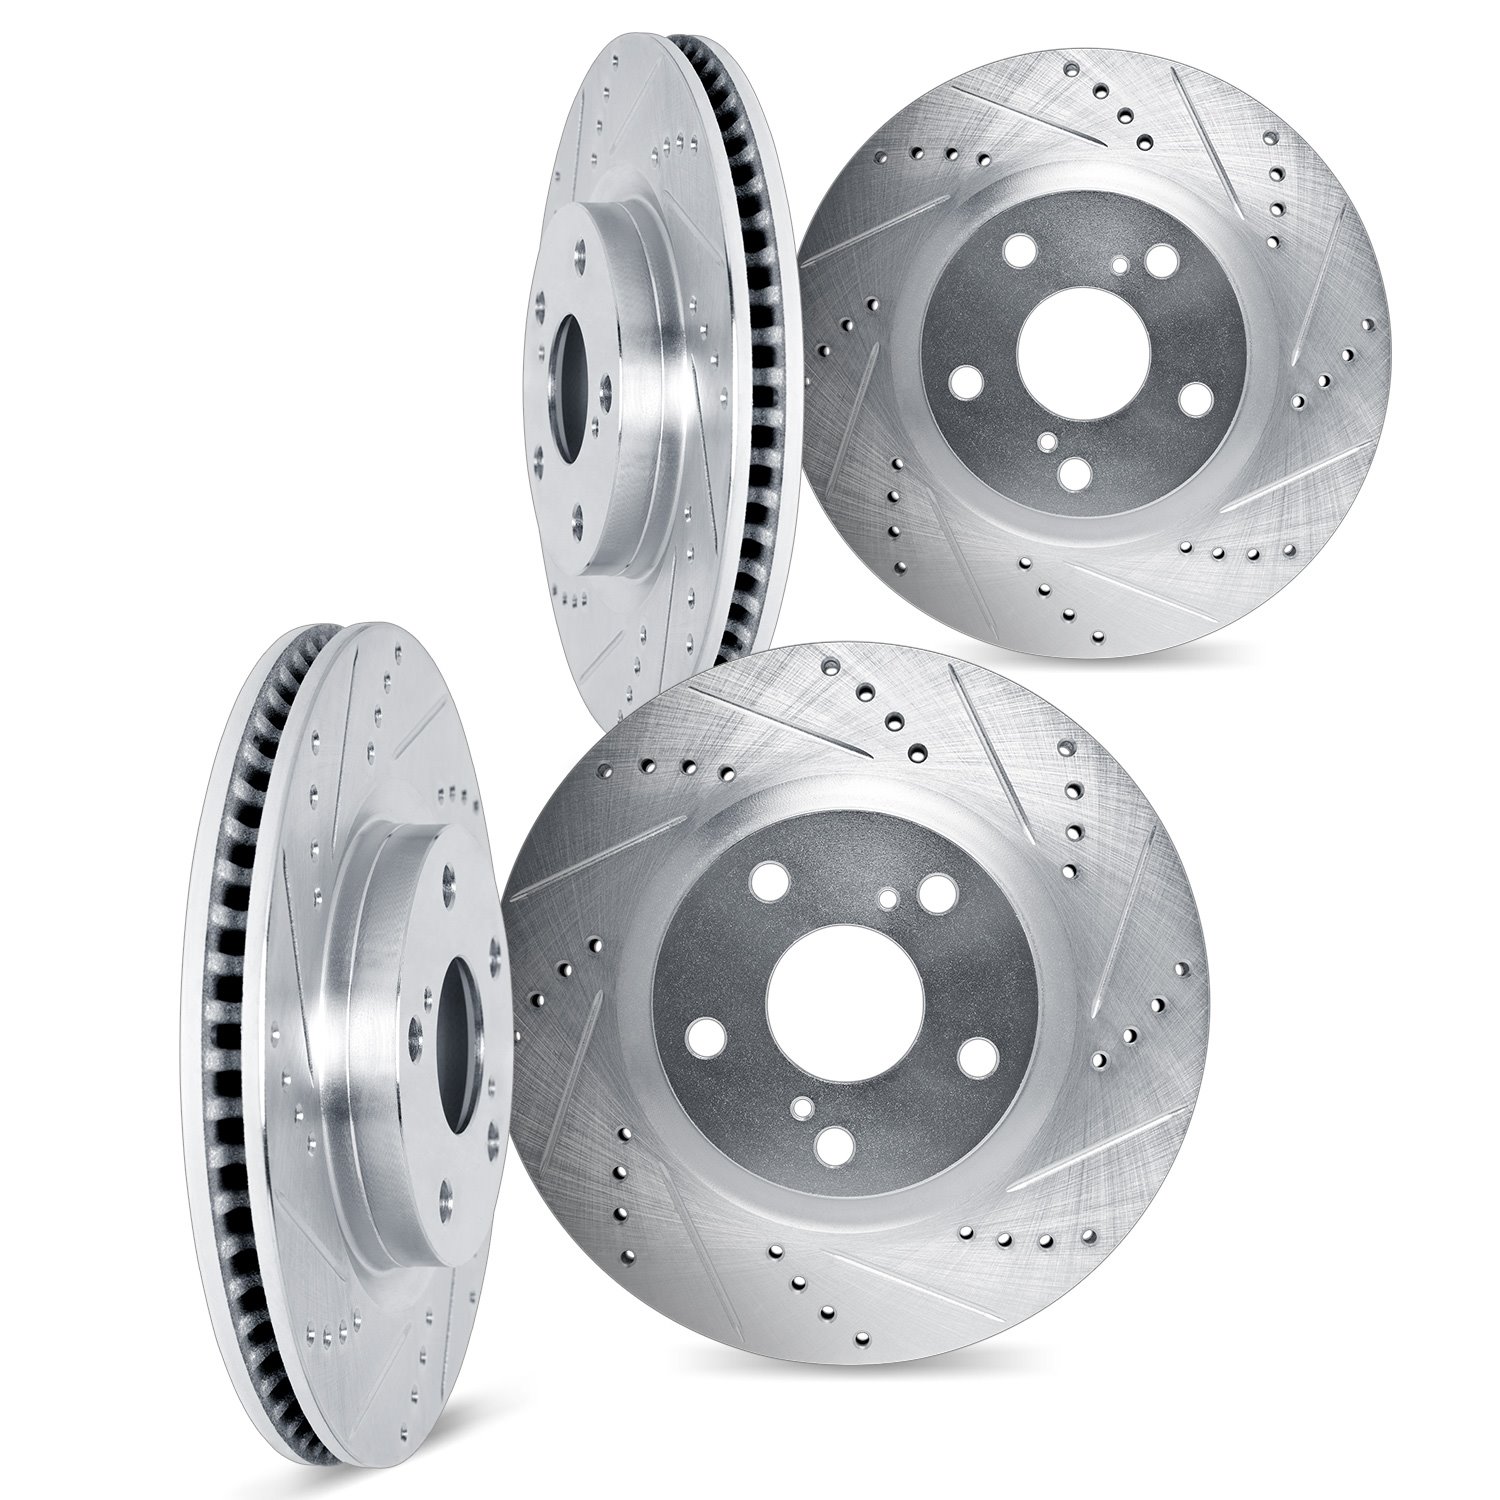 7004-67010 Drilled/Slotted Brake Rotors [Silver], Fits Select Infiniti/Nissan, Position: Front and Rear